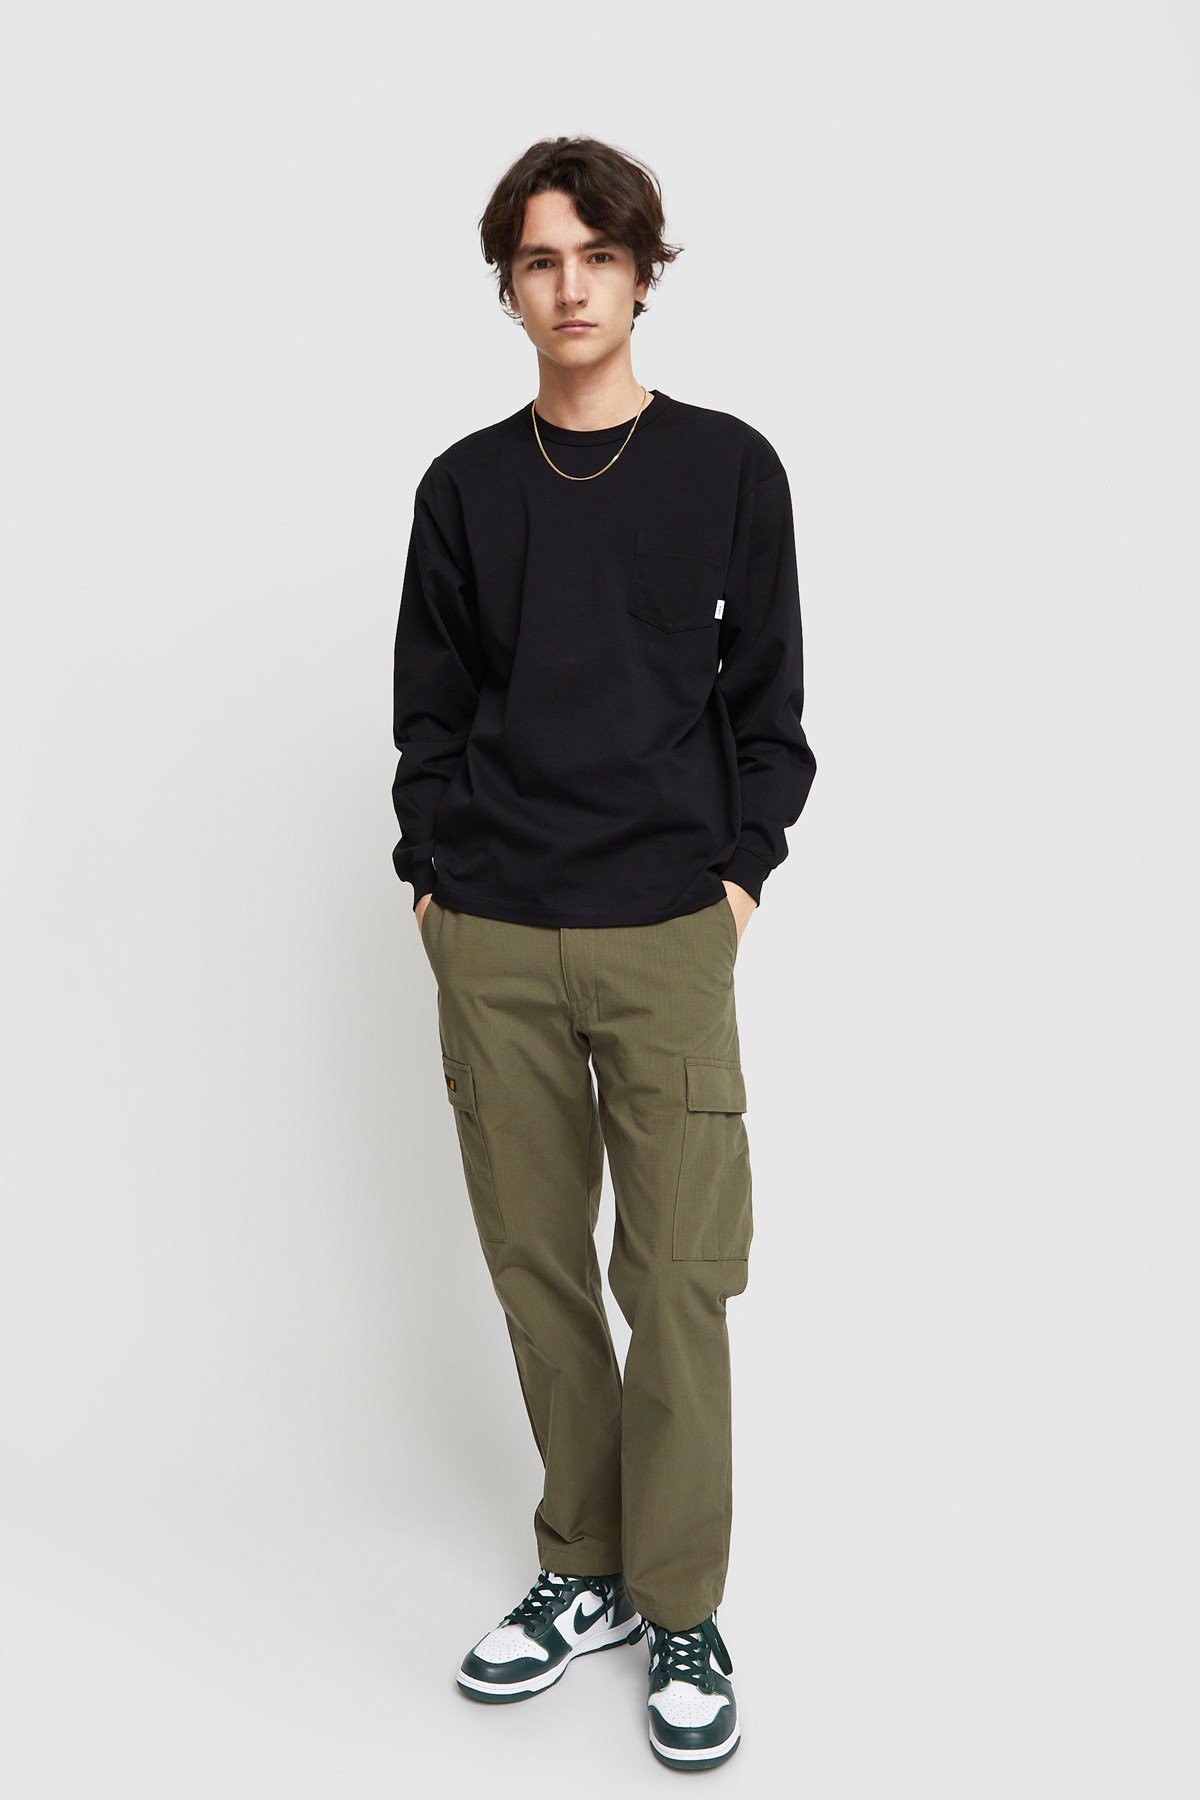 WTAPS Jungle Stock / Trousers. Nyco. Olive drab | WoodWood.com